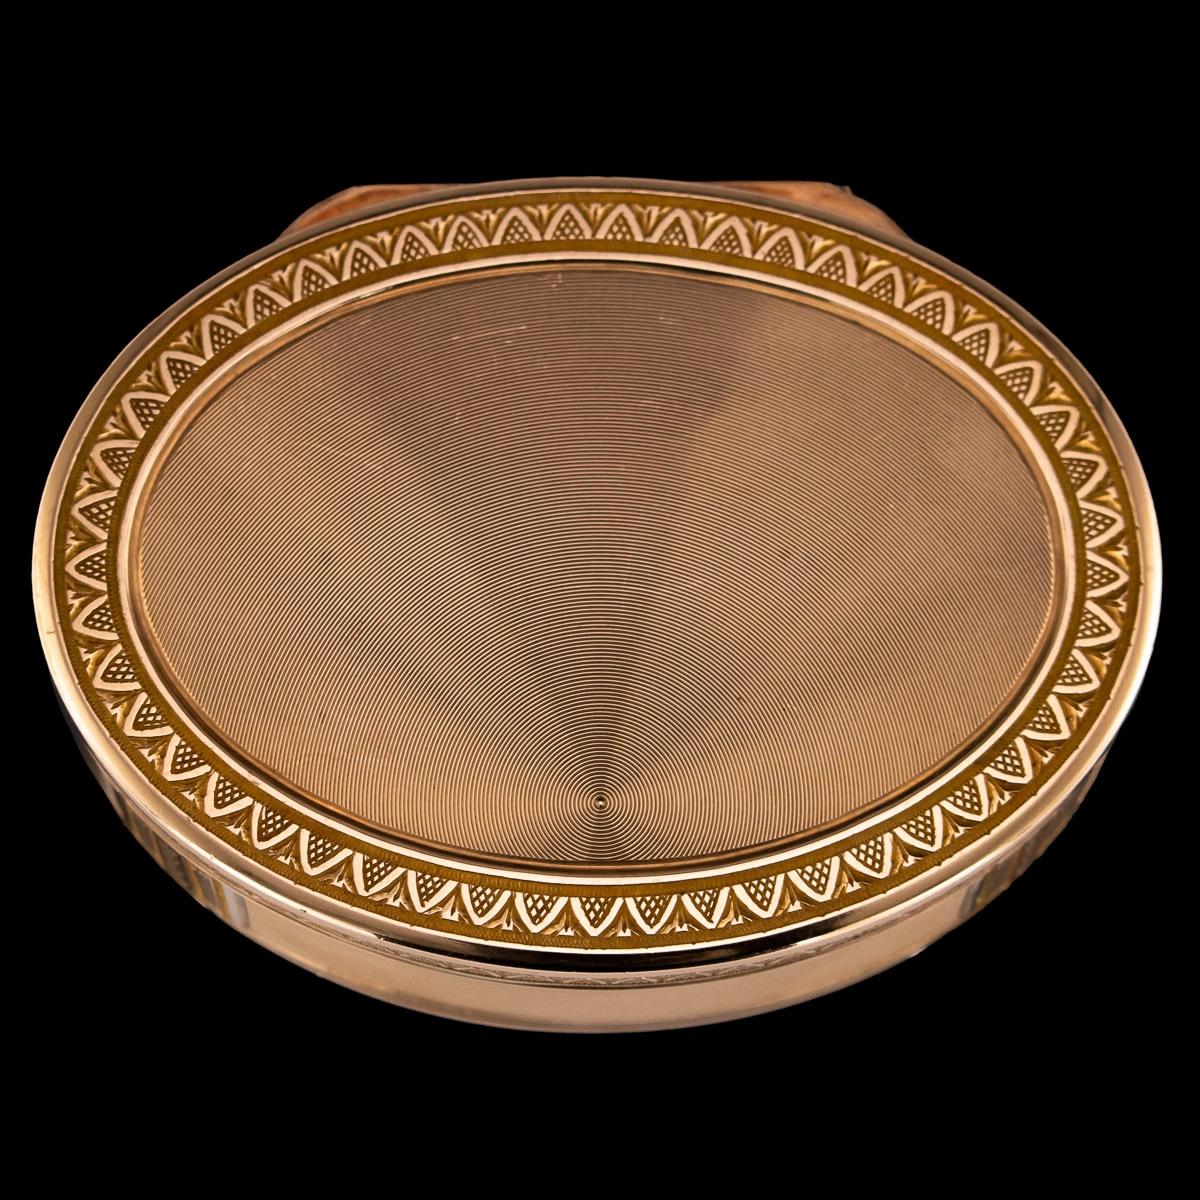 Antique 19th century French magnificent 18-karat gold snuff box, of traditional oval form, engine turned, sides chased with acanthus leaf boarders and engine turned sunburst ground. Hallmarked 18k (750 gold standard), Makers mark FO (unknown to me),